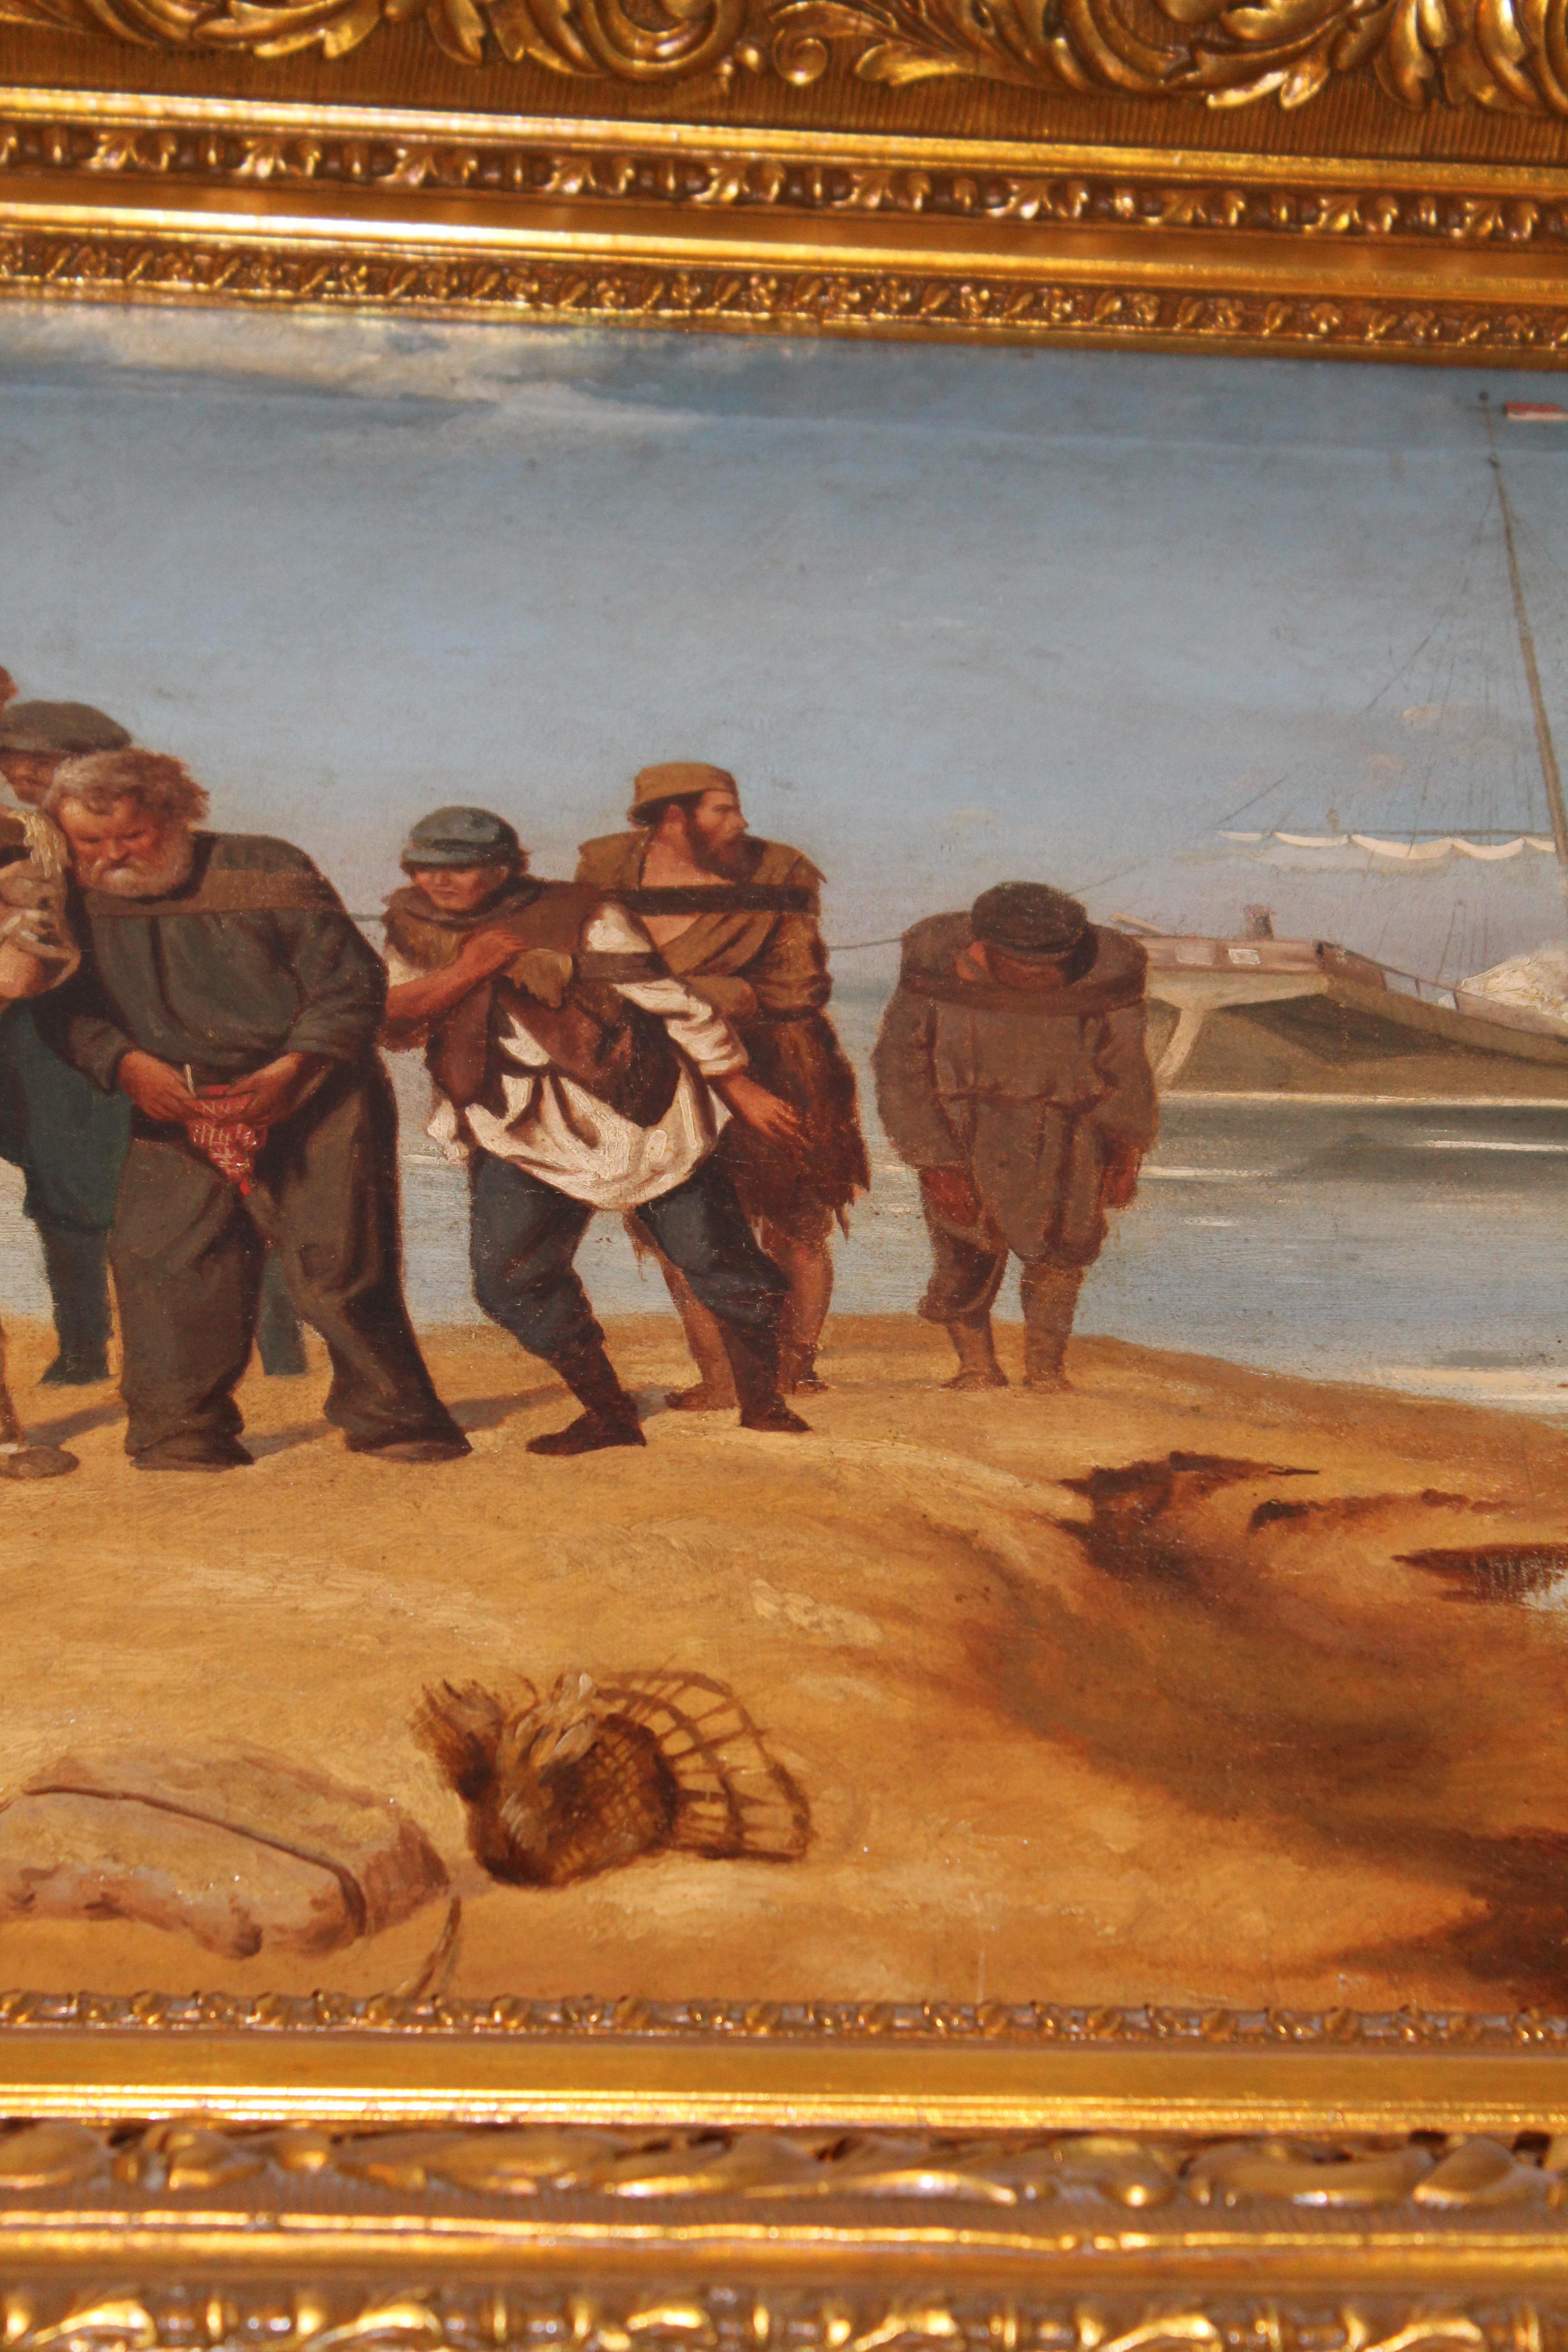 A giltwood framed oil painting of “Barge Haulers on the Volga” after the renowned version by the Russian artist Ilya Repin (19th Century). Depicting eleven men on the bank of the Volga river in Russia, each with roped tied to their chest as they